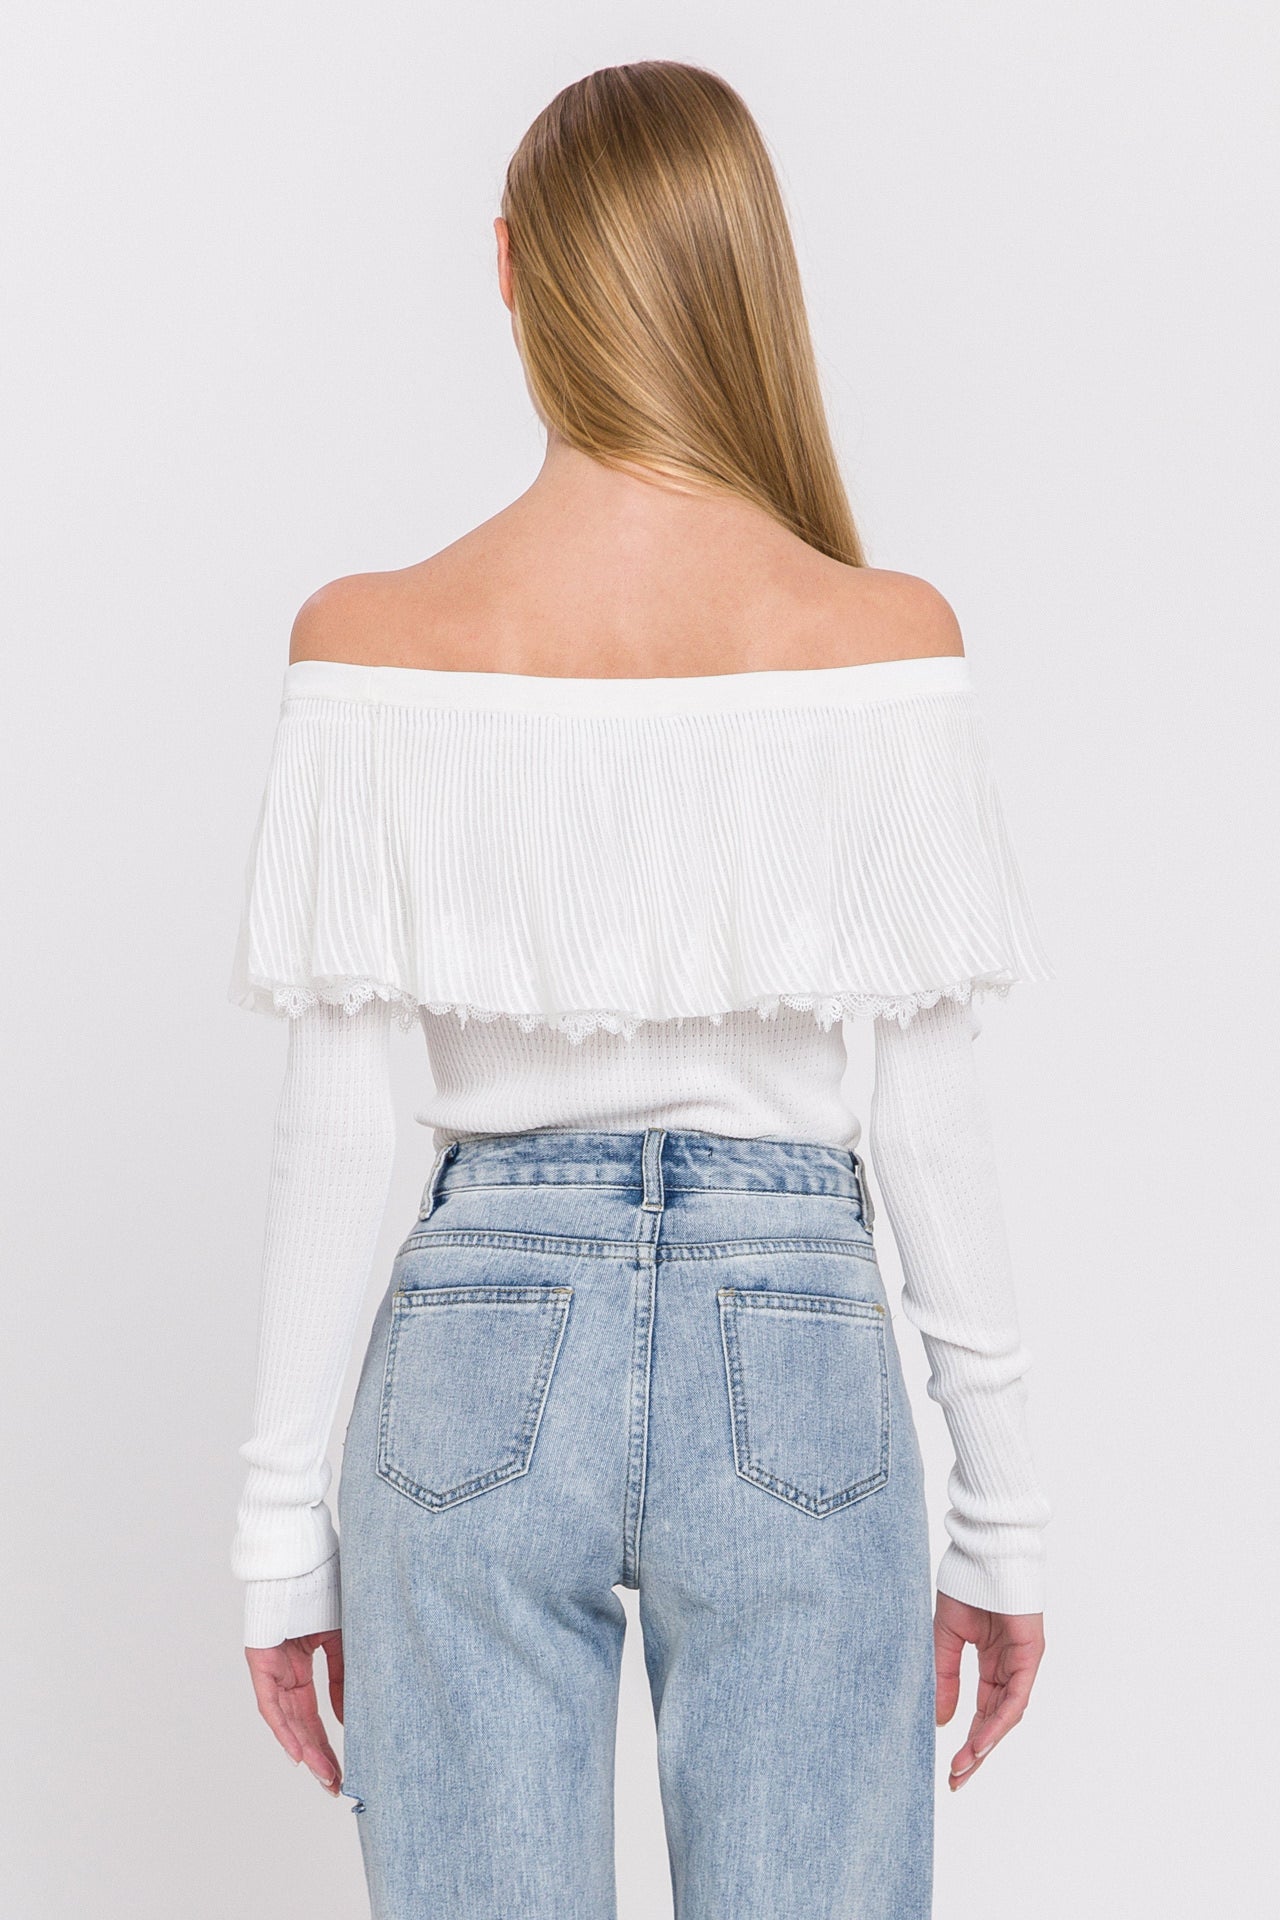 OBJECTRARE - Lace Ruffle Off-The-Shoulder Top - SWEATERS & KNITS available at Objectrare